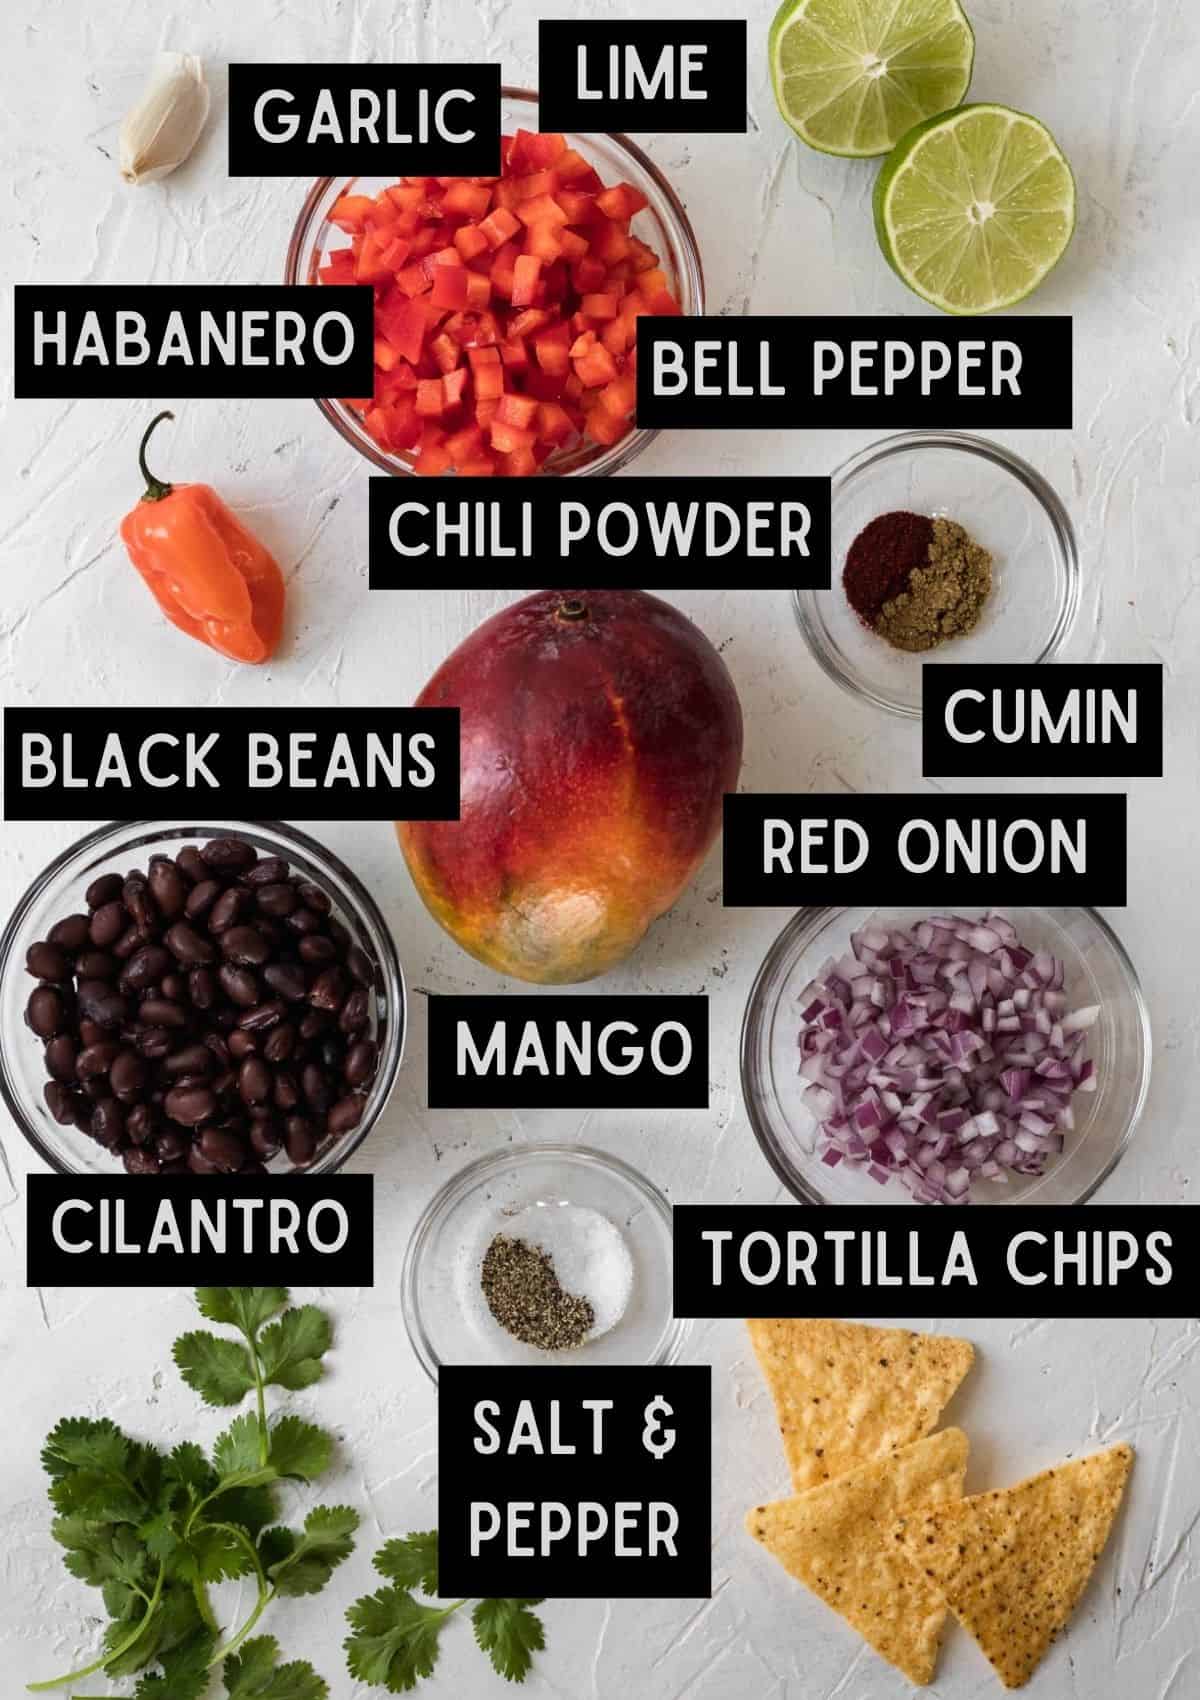 Labelled ingredients for mango habanero salsa with black beans (see recipe for details).